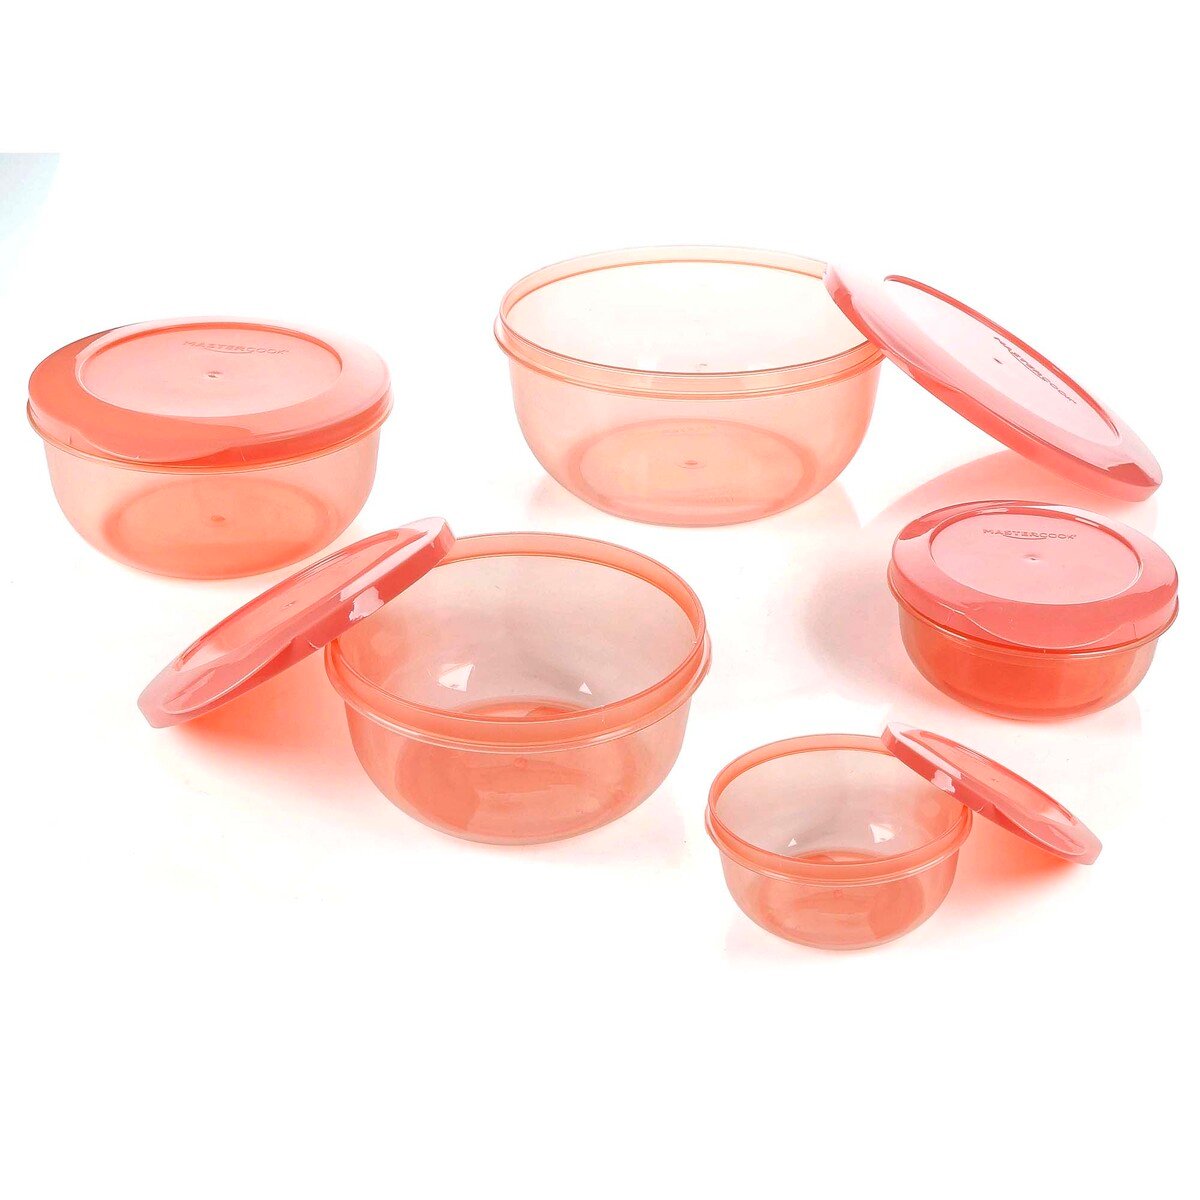 Master Cook Malta Air Tight Food Containers, 5 Pcs